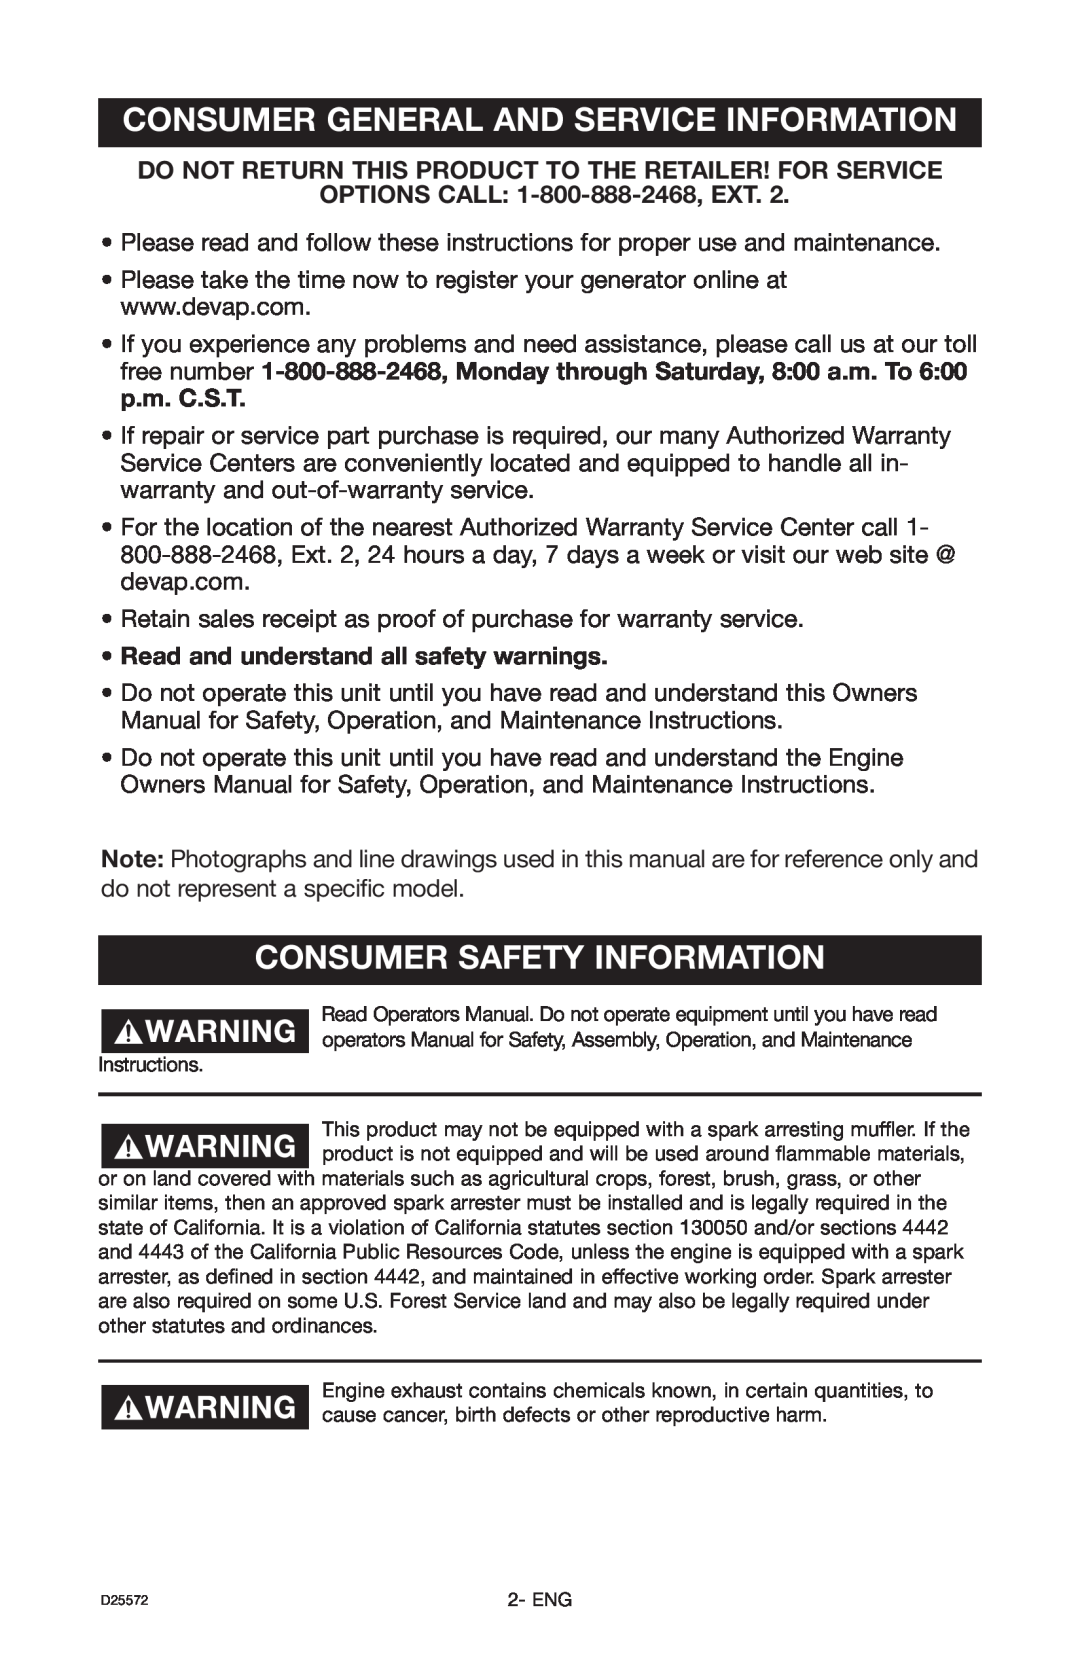 DeVillbiss Air Power Company D25572 warranty Consumer General And Service Information, Consumer Safety Information 